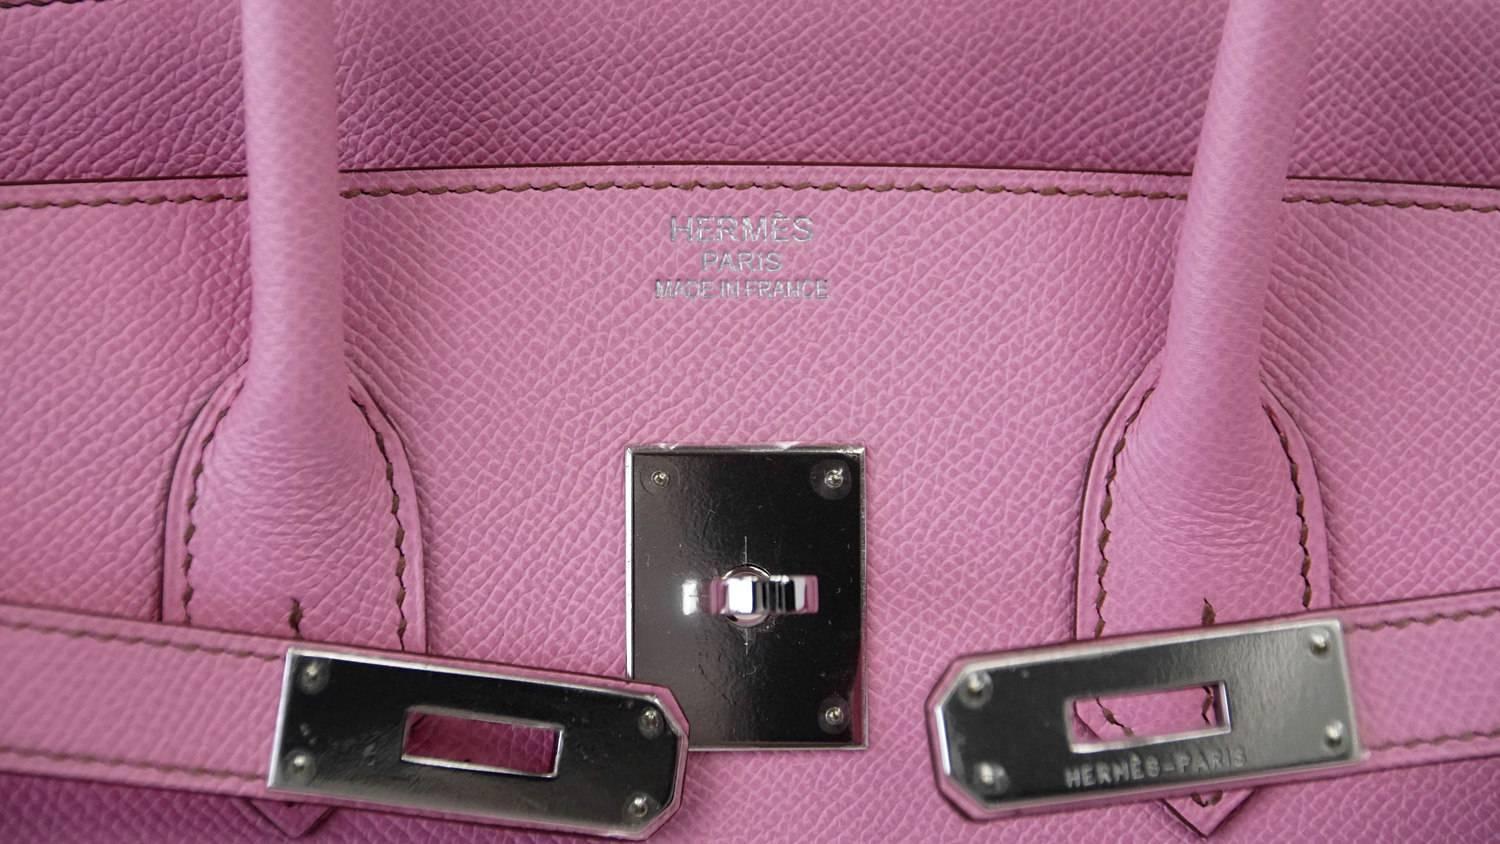 Guaranteed authentic exquisite rare Urban Legend 5P Pink in Epsom.
Fresh with Palladium hardware.
Carried one time only.  Plastic on hardware.
Comes with lock, keys and clochette, raincoat and signature HERMES box.
more pictures available upon